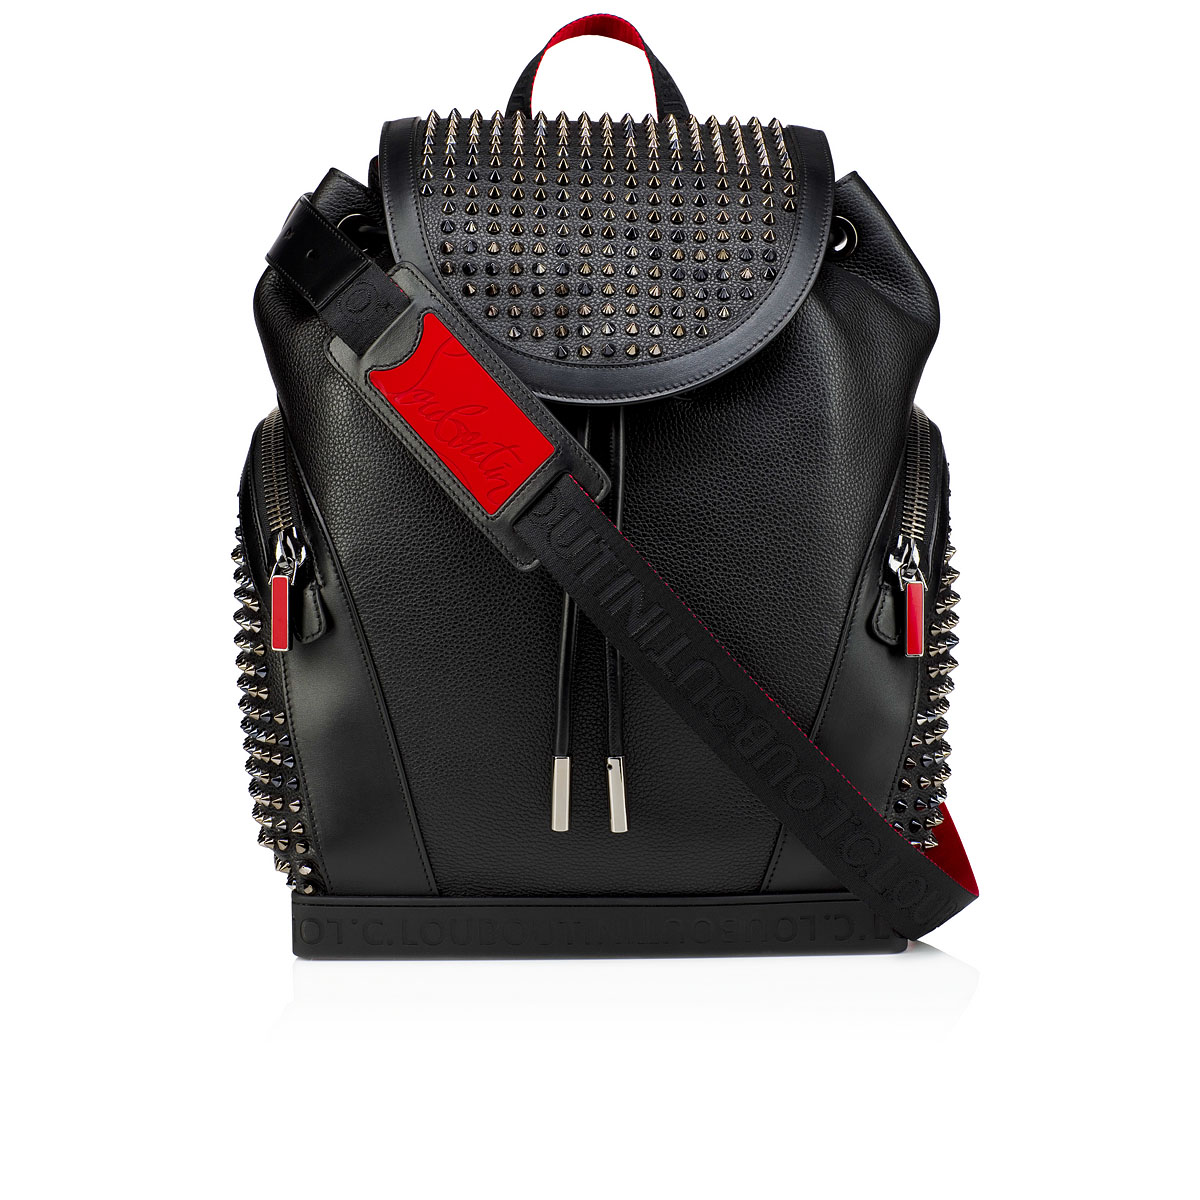 Explorafunk - Backpack - Calf leather and spikes - Black ...